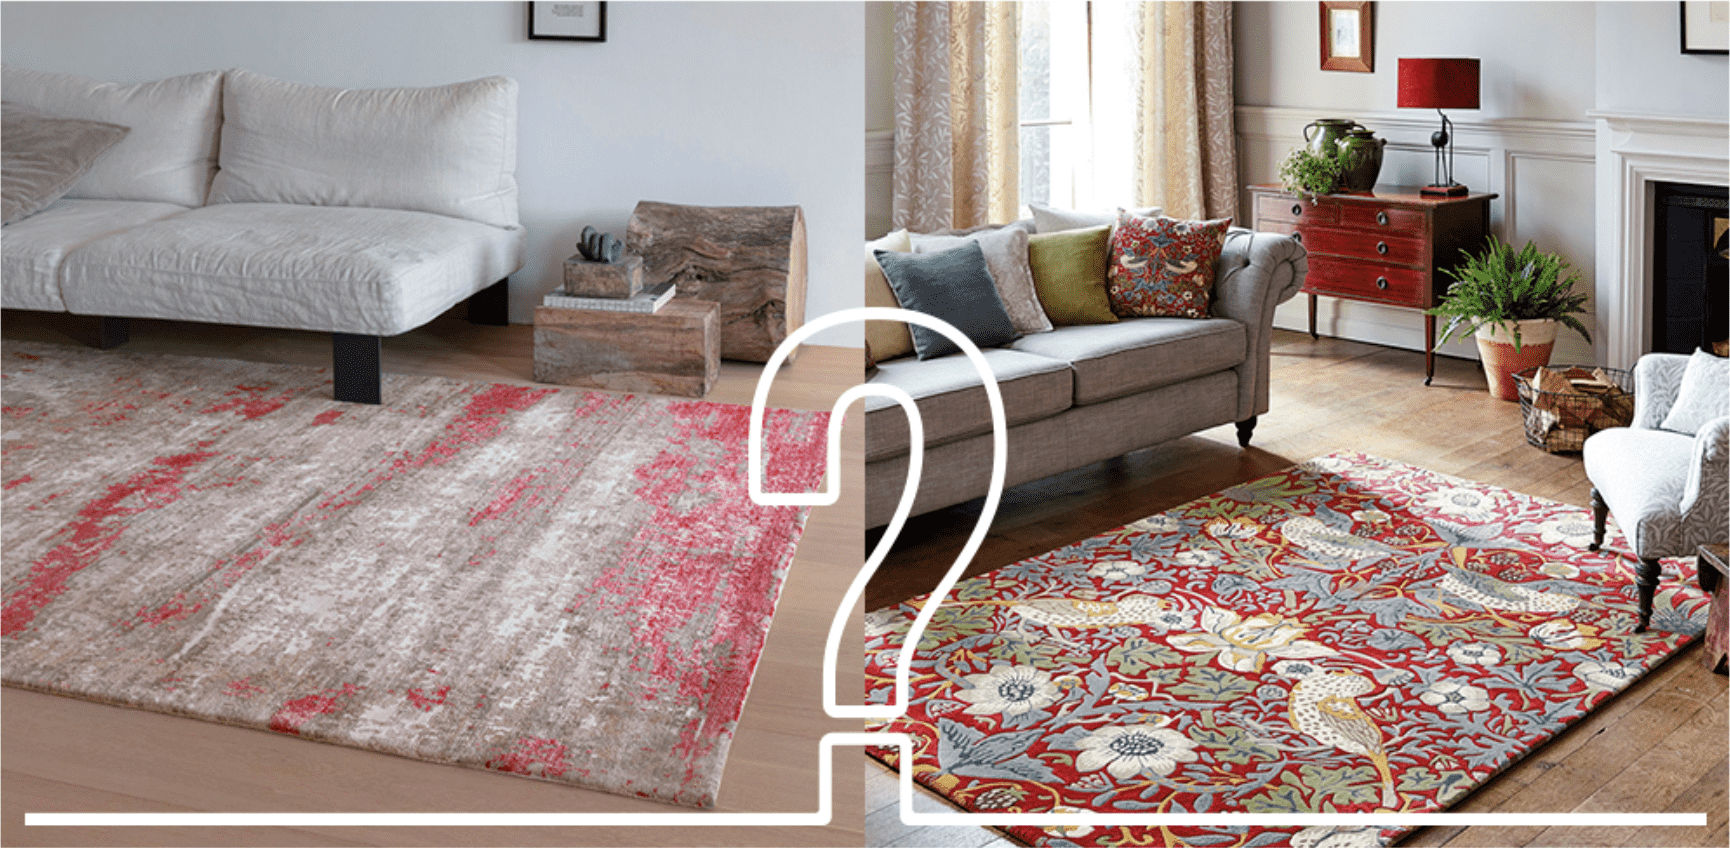 Hand-Knotted vs Hand-Tufted Rugs: What's the Difference?